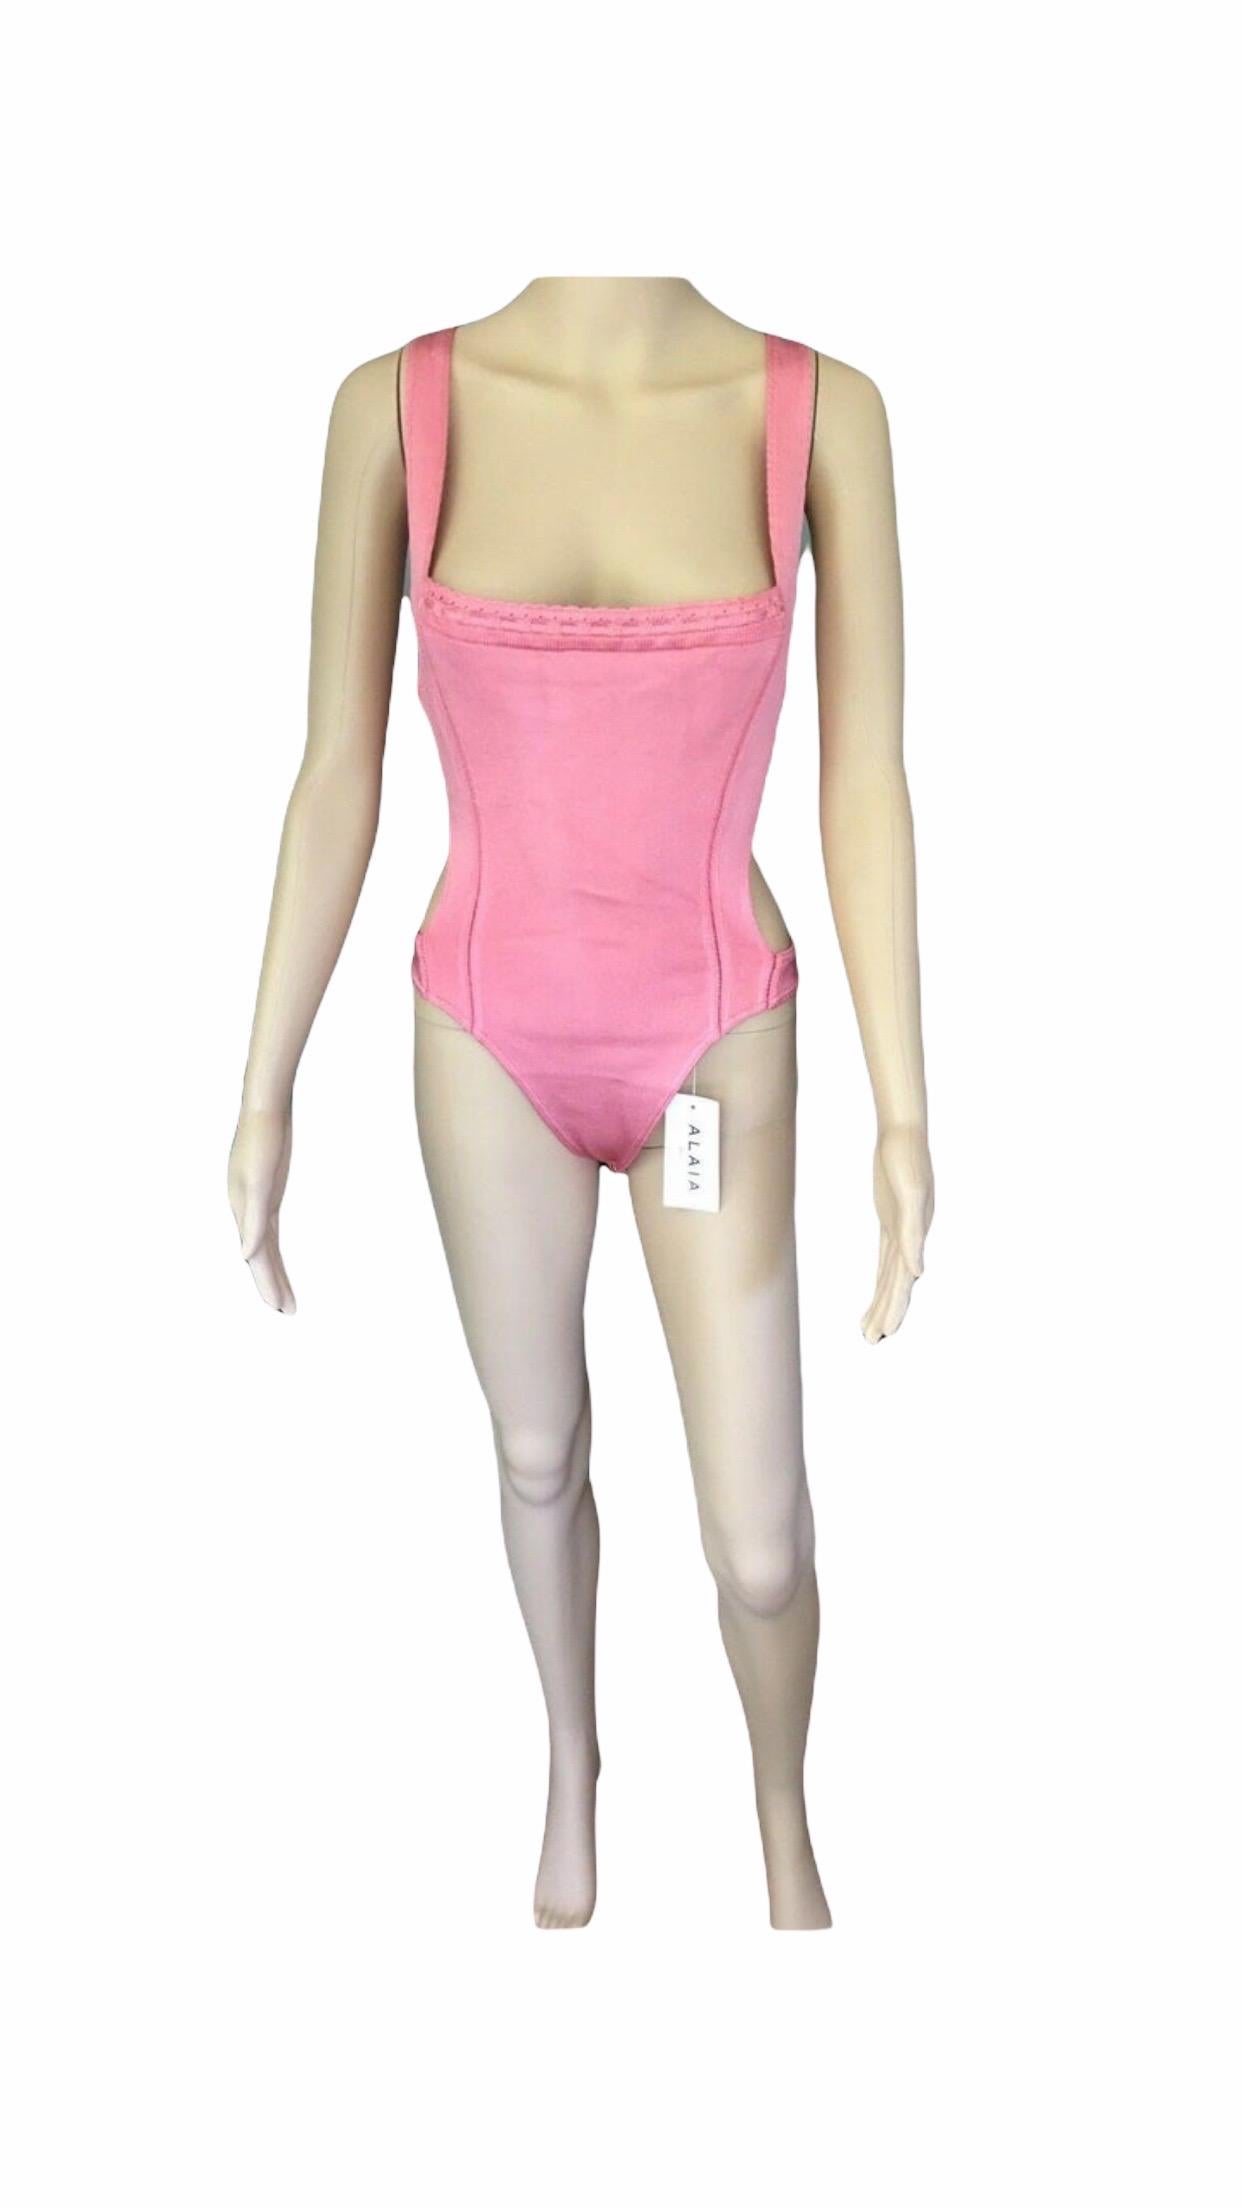 New Azzedine Alaia Vintage Bodysuit In New Condition For Sale In Naples, FL